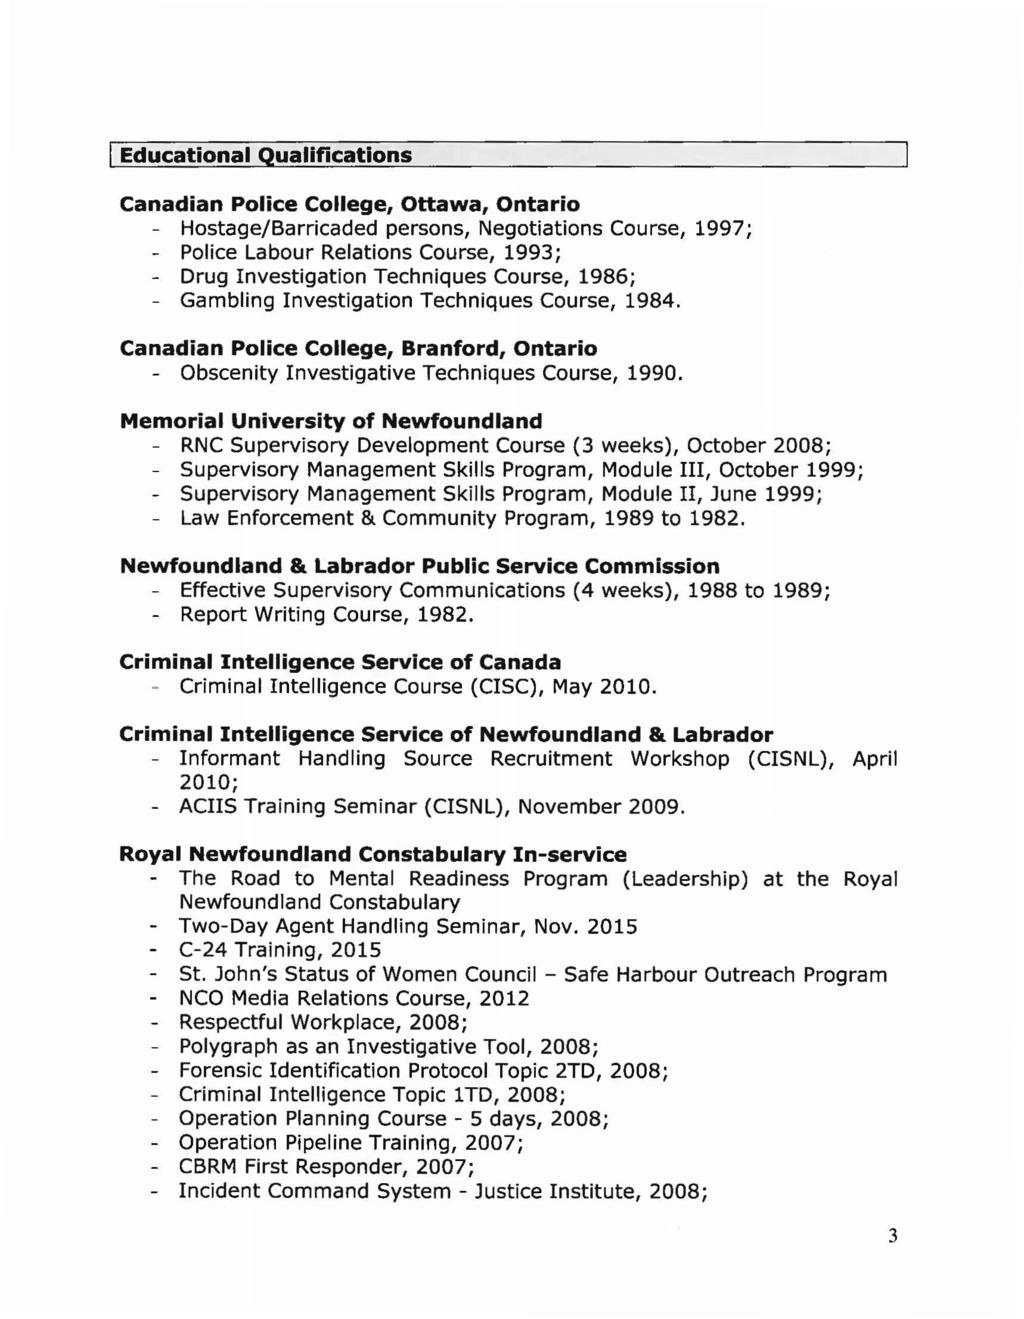 CIDDD Exhibit P-0514 Page 4 I Educational Qualifications Canadian Police College, Ottawa, Ontario - Hostage/Barricaded persons, Negotiations Course, 1997; - Police Labour Relations Course, 1993; -